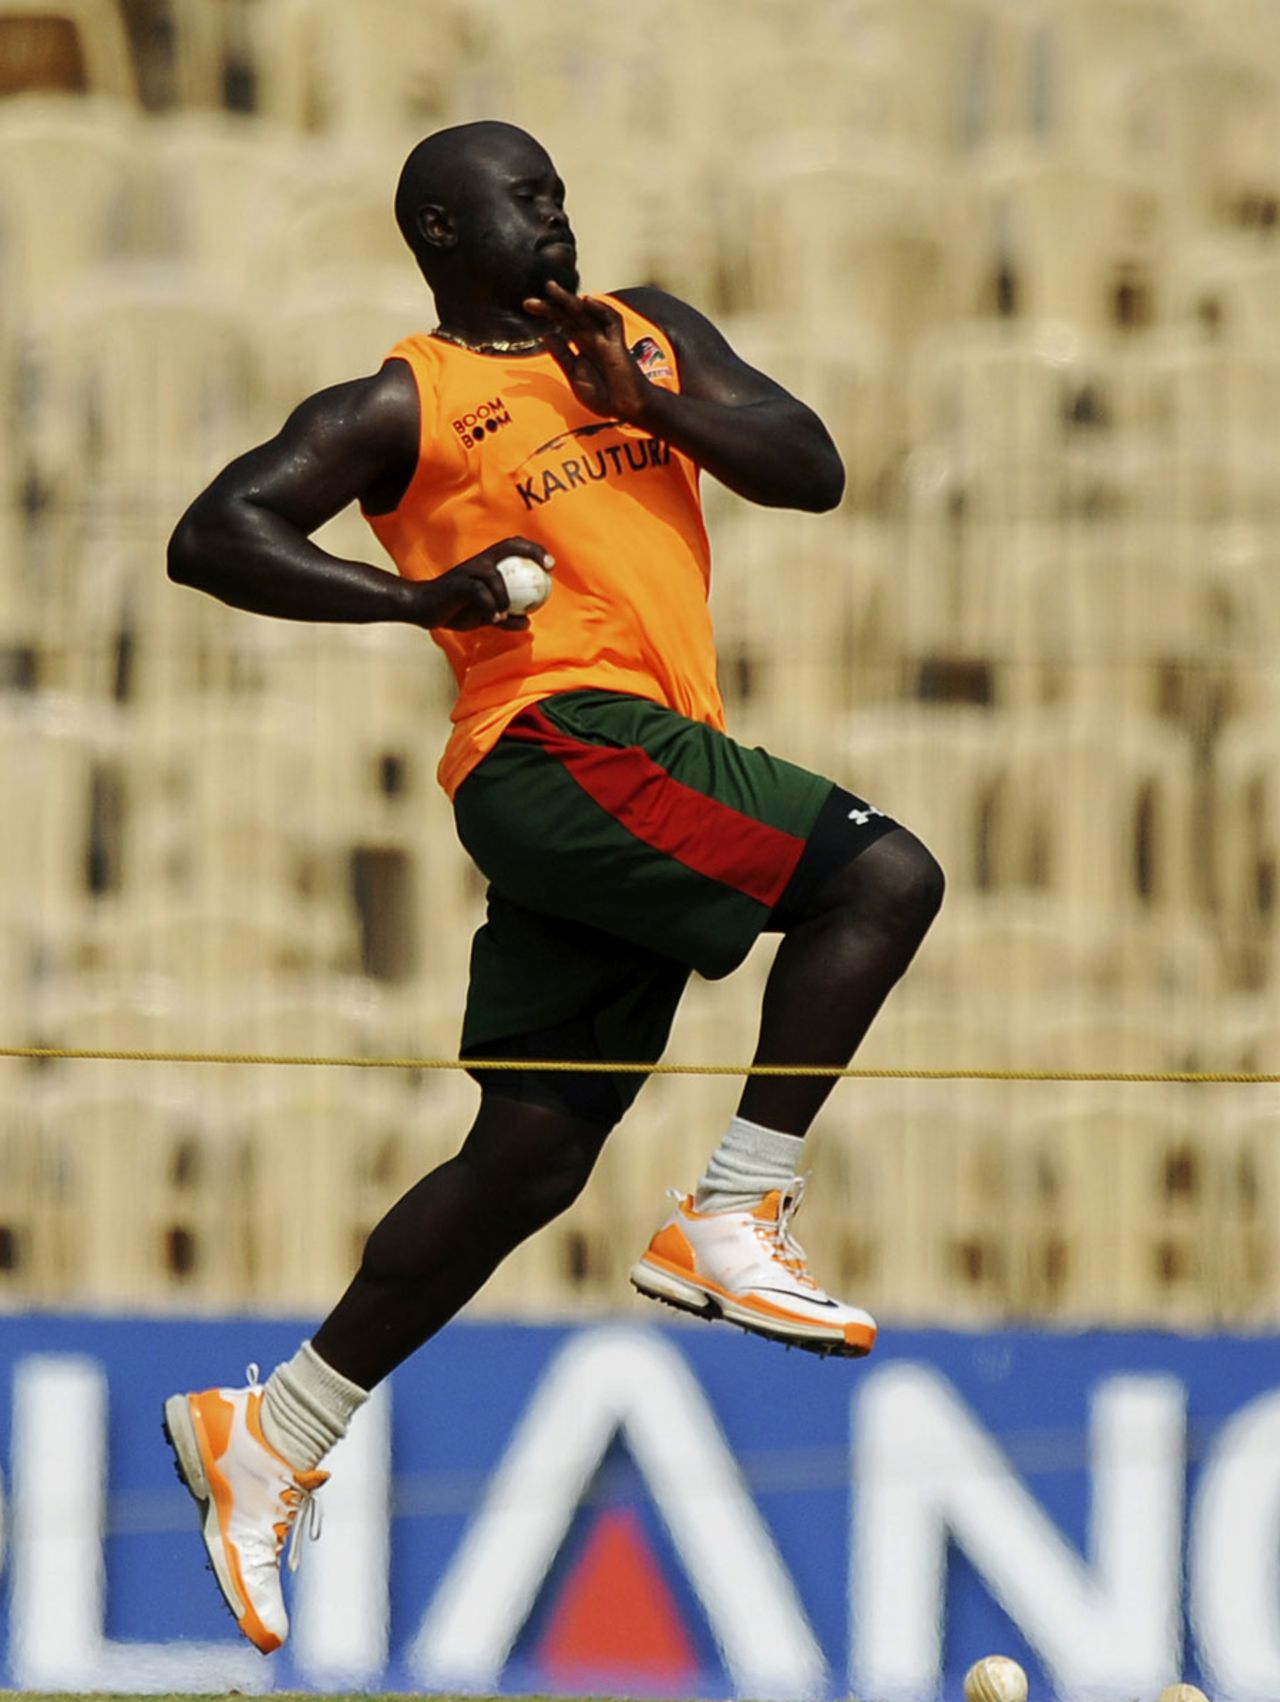 Thomas Odoyo bowls at a training session on the eve of Kenya's opening World Cup match, Chennai, February 19, 2011